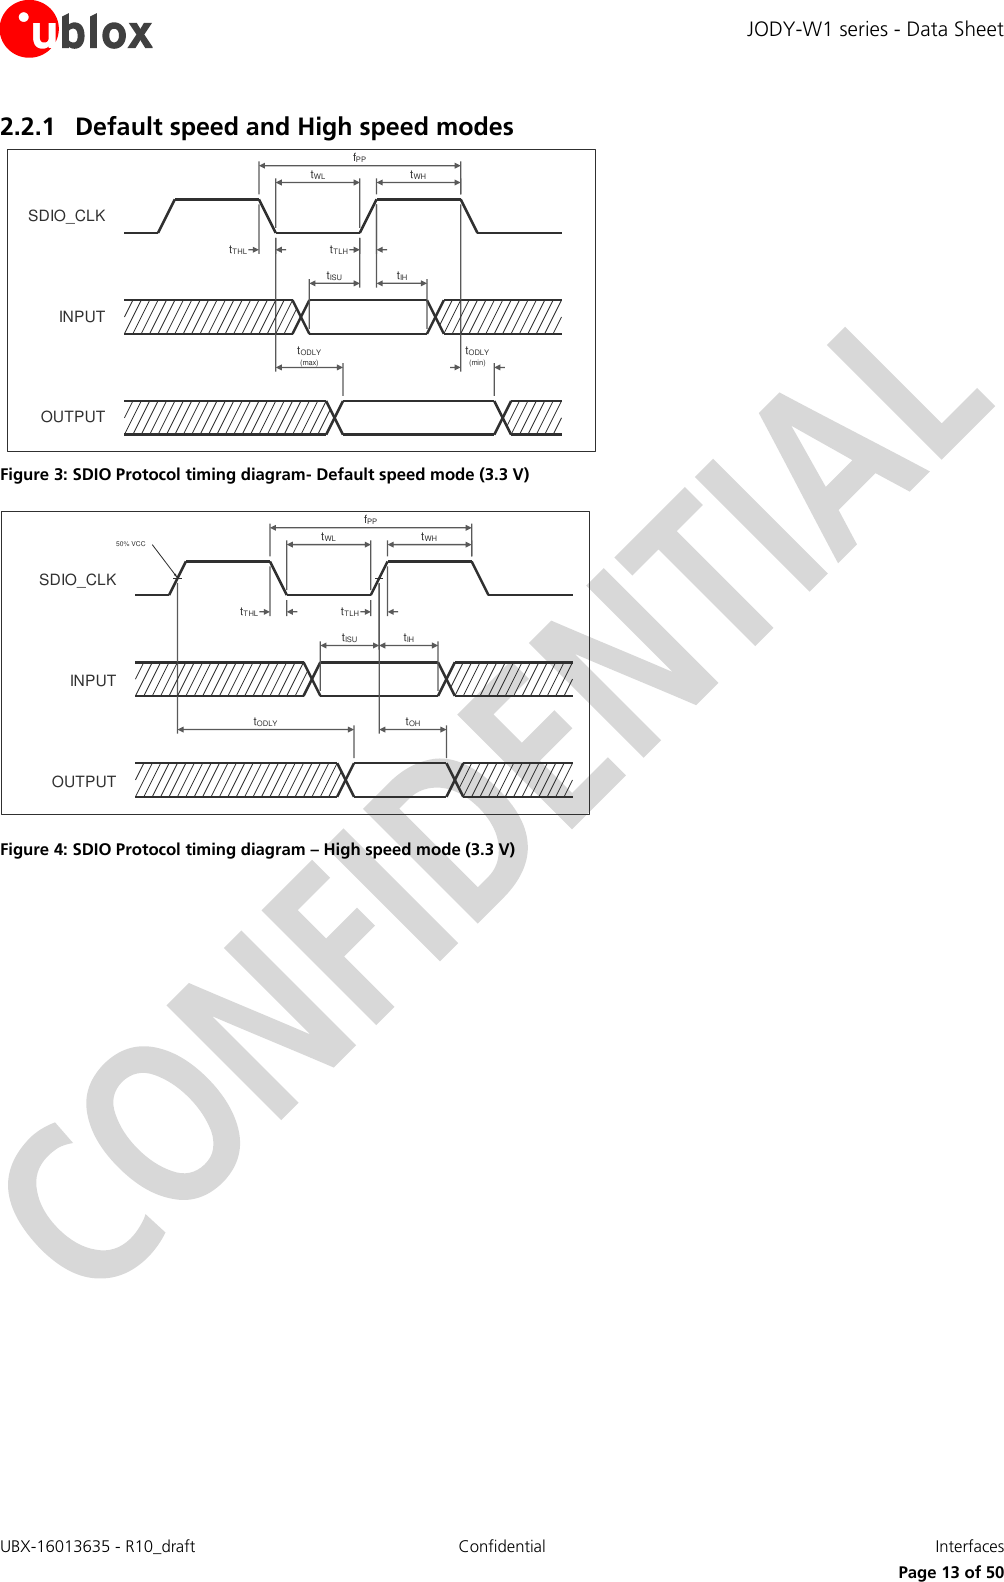 JODY-W1 series - Data Sheet UBX-16013635 - R10_draft Confidential  Interfaces     Page 13 of 50 2.2.1 Default speed and High speed modes    Figure 3: SDIO Protocol timing diagram- Default speed mode (3.3 V)  Figure 4: SDIO Protocol timing diagram – High speed mode (3.3 V) SDIO_CLKINPUTOUTPUTfPPtTHLtWLtWHtTLHtODLY(max)tODLY(min)tISUtIHSDIO_CLKINPUTOUTPUTfPPtTHLtWLtWHtTLHtODLYtOHtISUtIH50% VCC